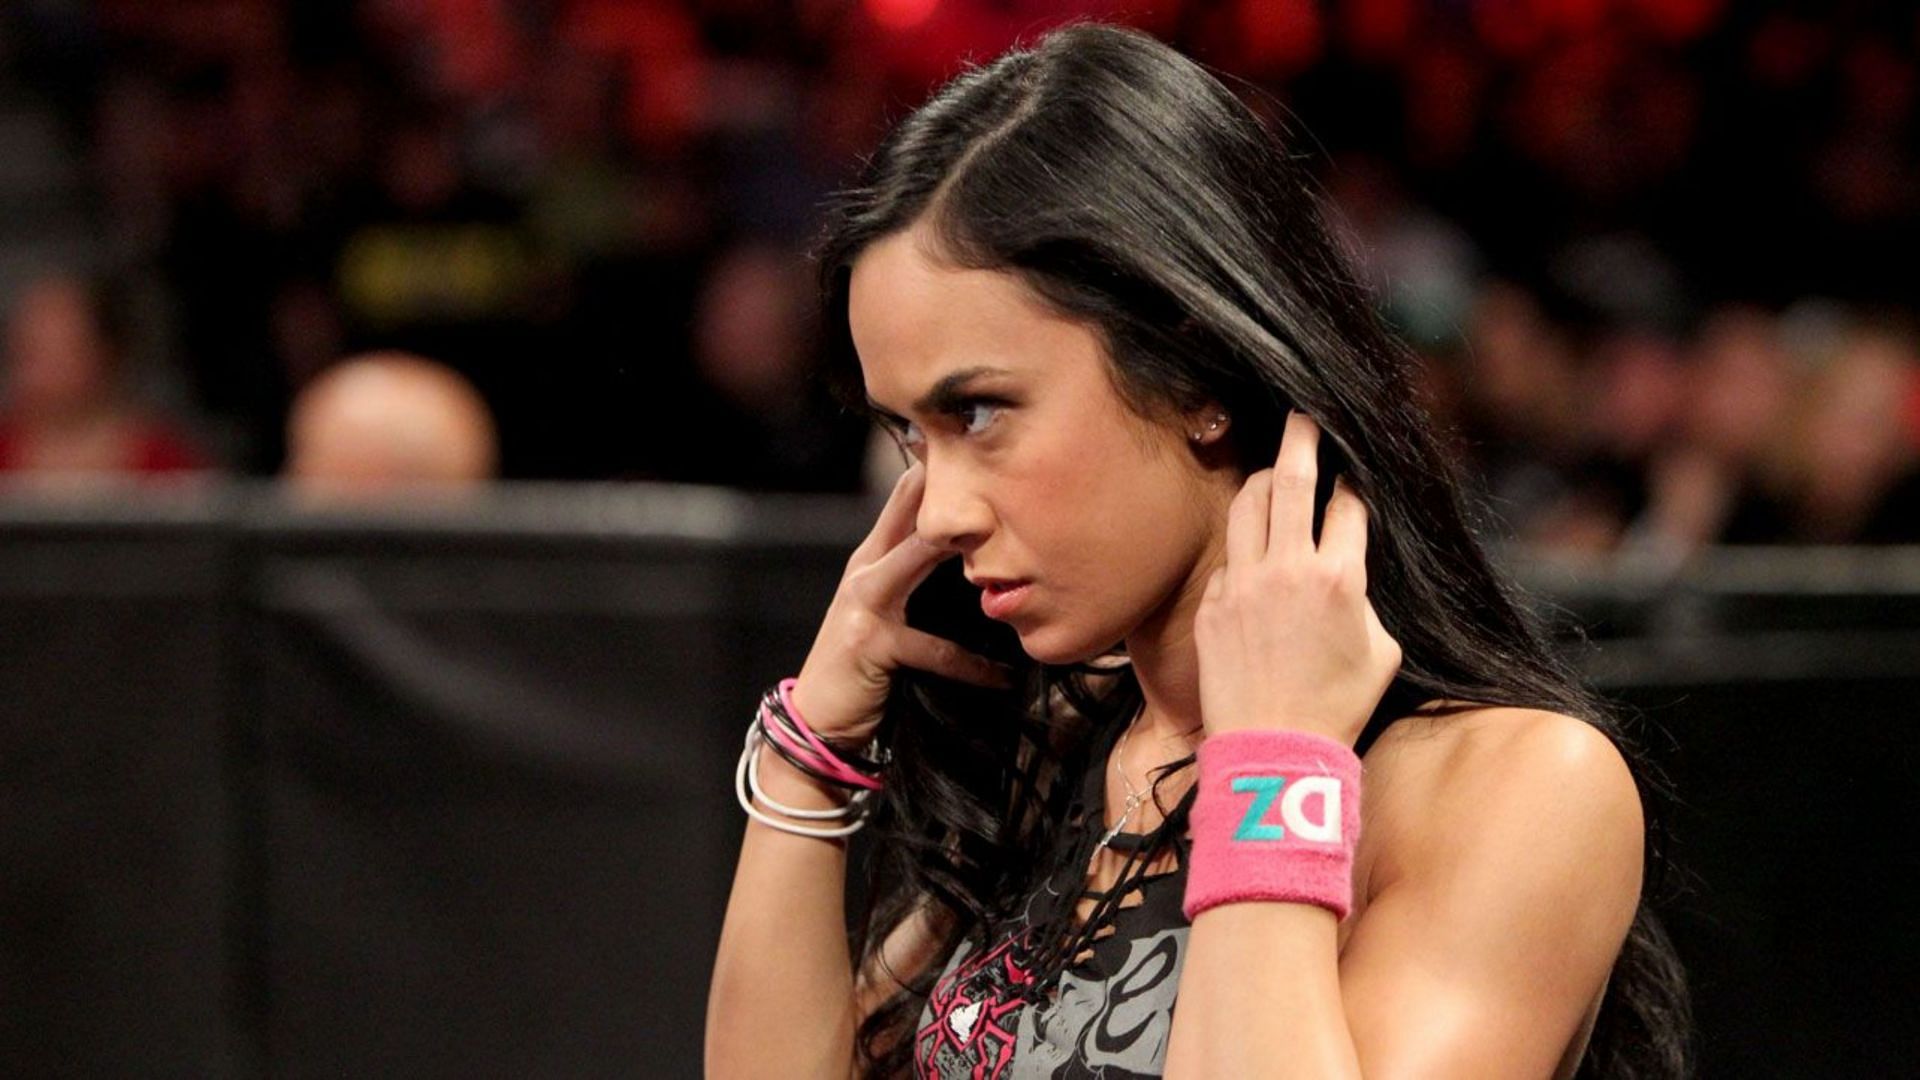 AJ Lee listed CM Punk as &quot;Grandpa&quot; on her phone